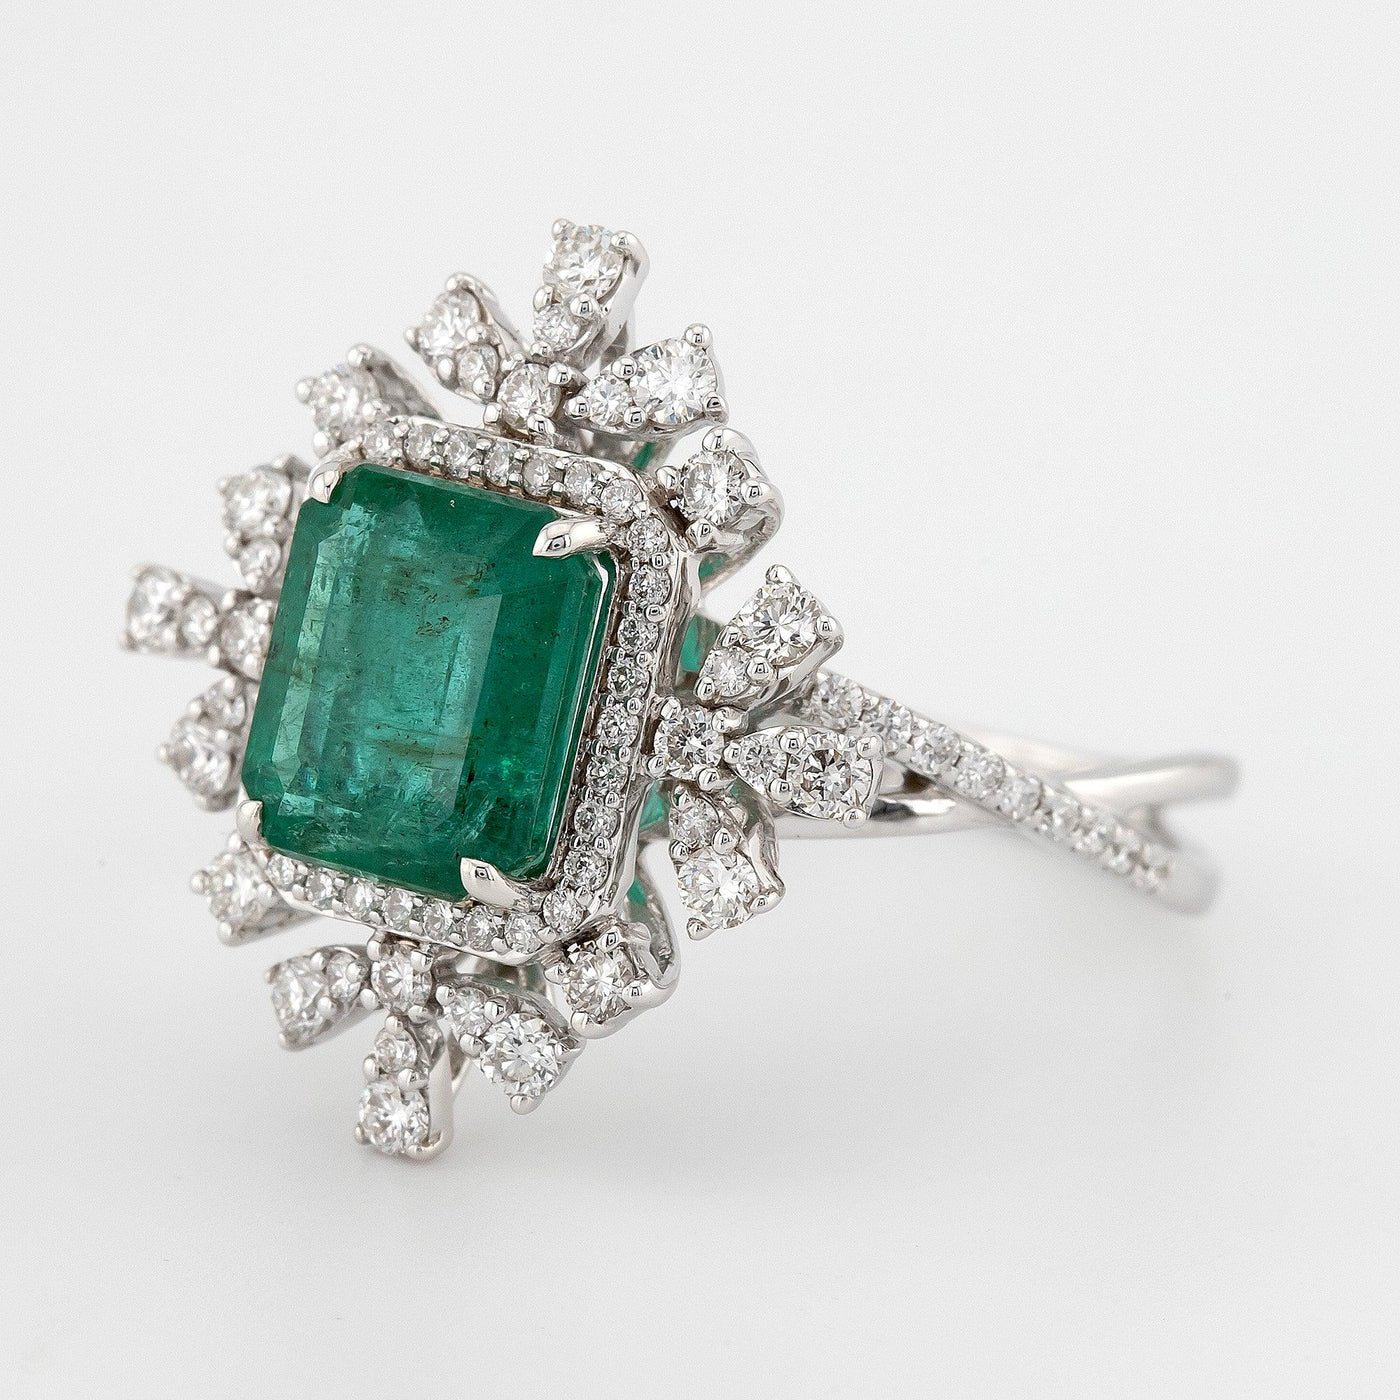 Vintage emerald shaped green emerald color with split shank, eagle prongs and halo setting engagement ring - Rubysta